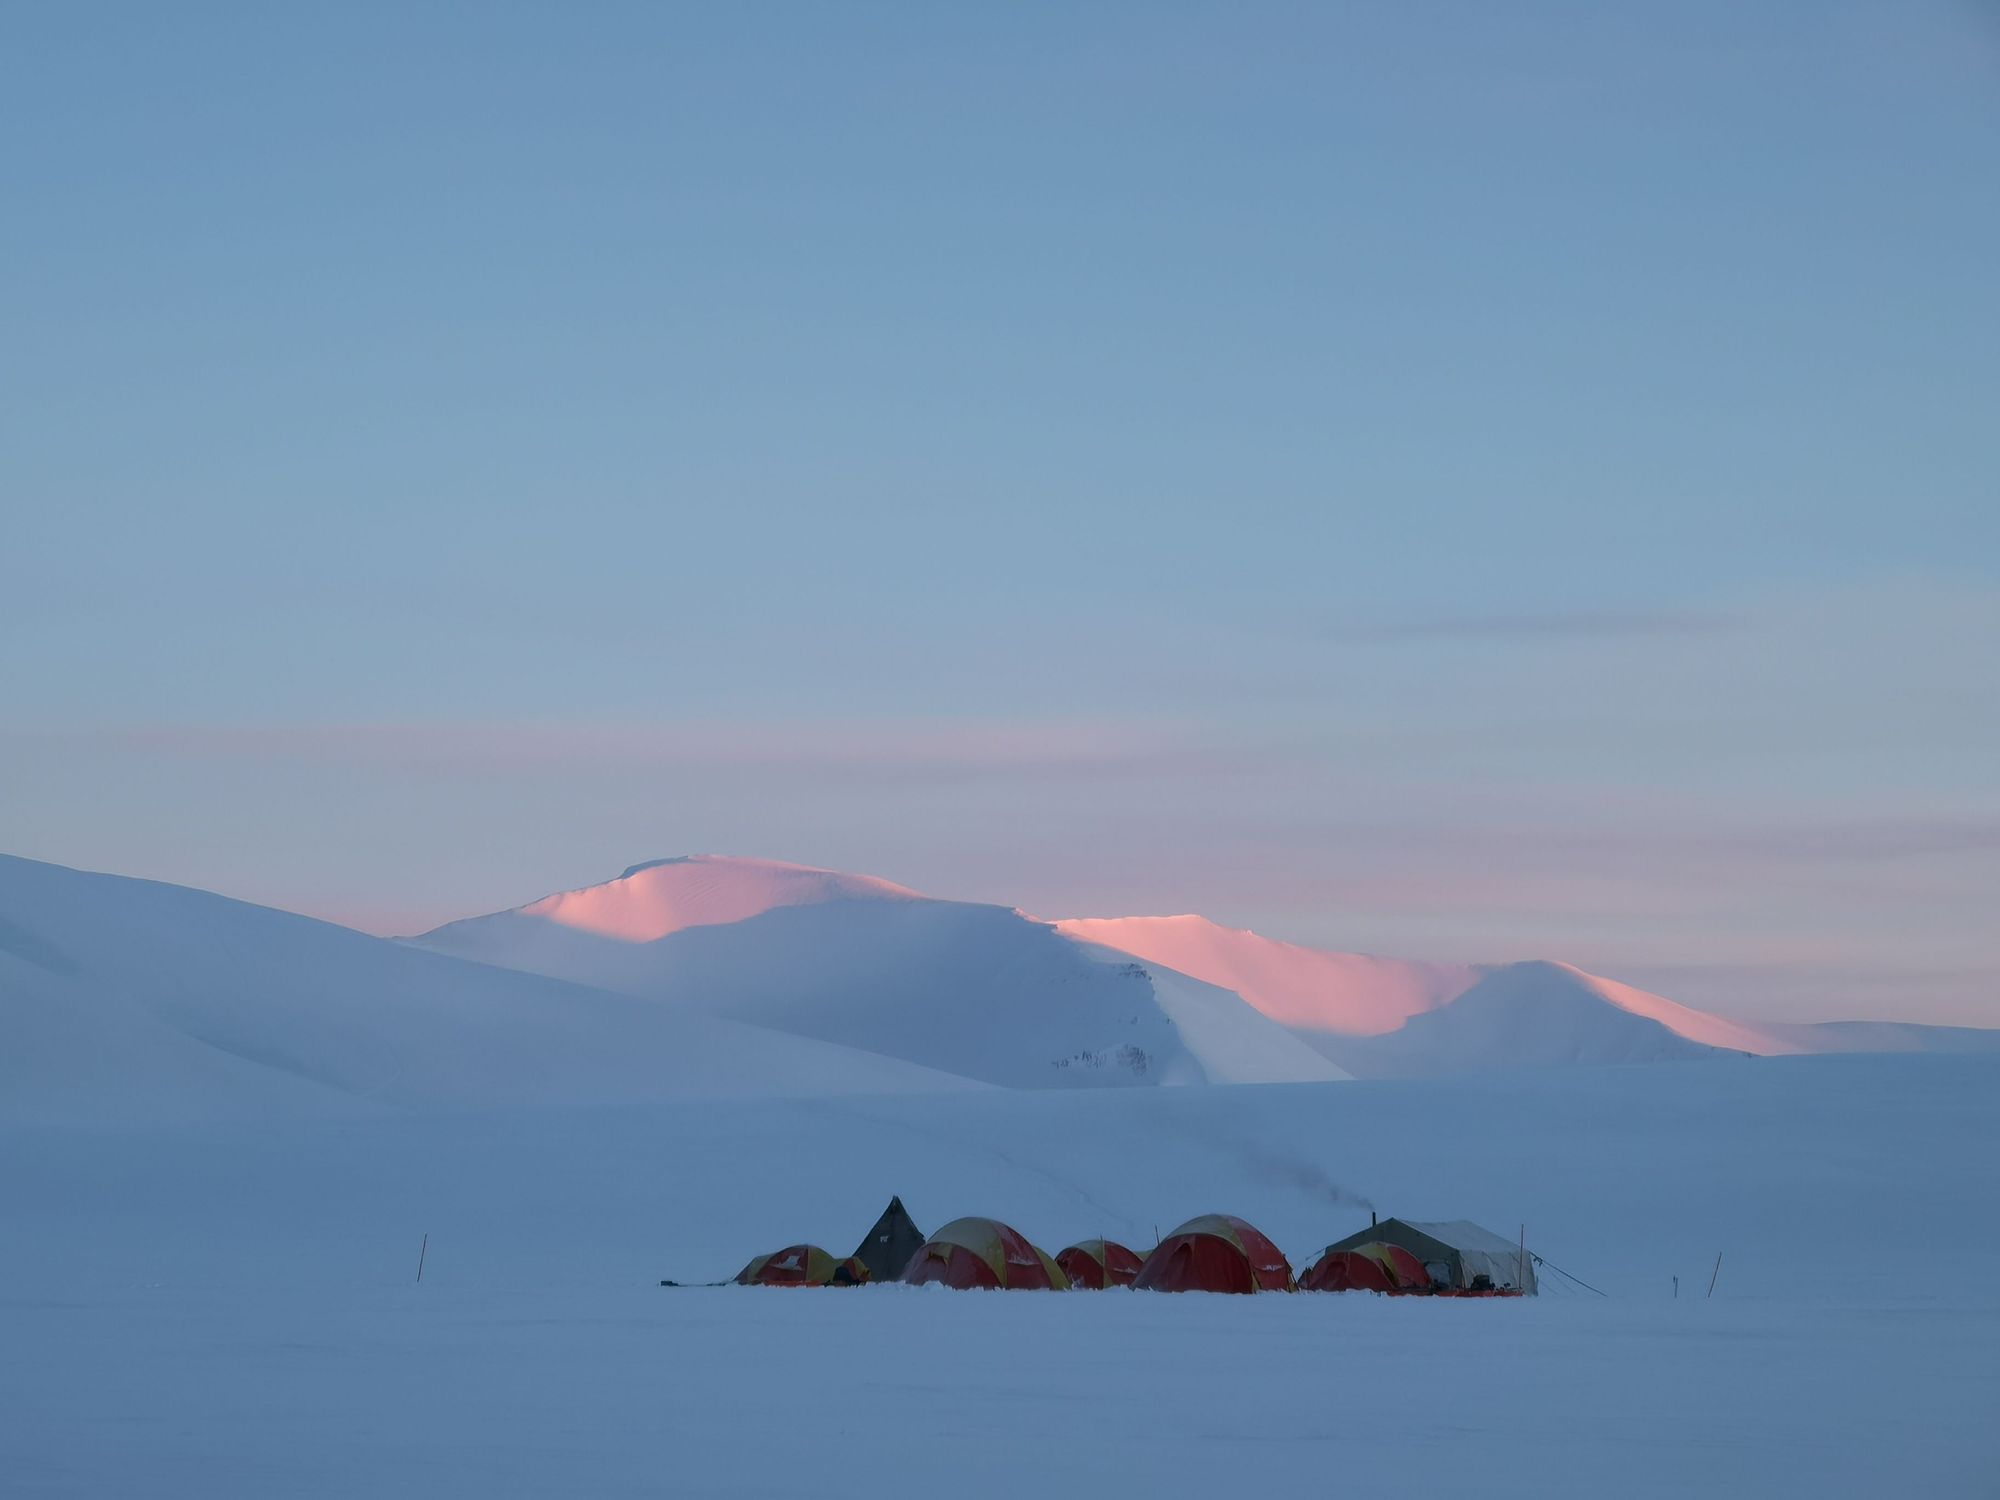 A wild campsite in the heart of Svalbard, Norway